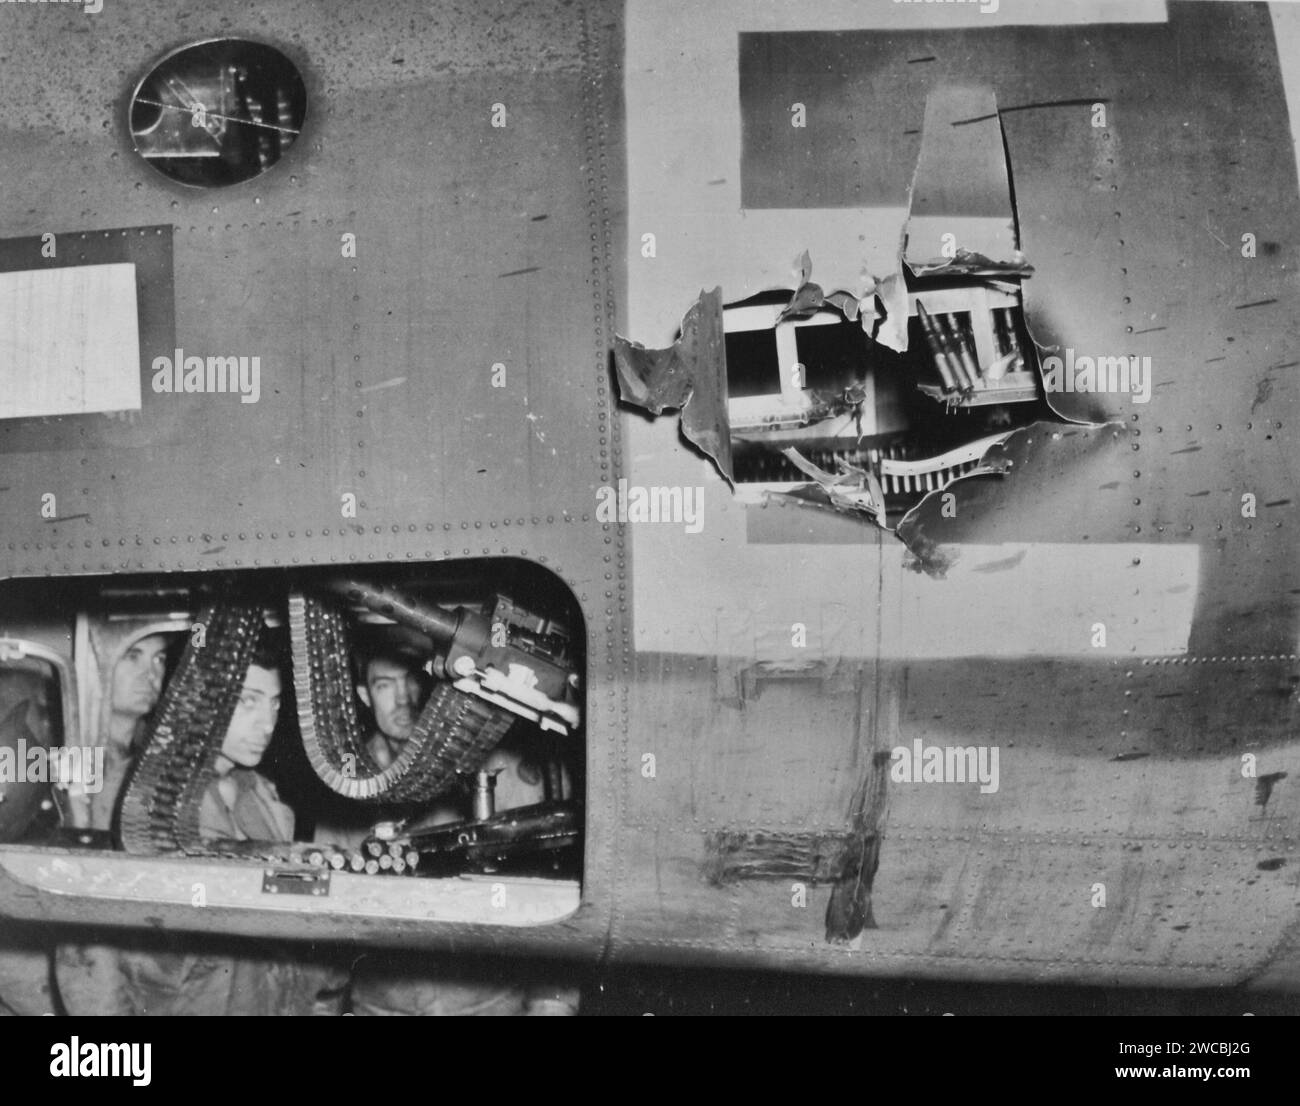 Martin B-26 damaged by flak. They come home when flak damage is no worse than this. U.S. planes, while tough, are not as AA-proof as some manufacturers' advertisements indicate so it pays to take all possible anti-flak measures Stock Photo